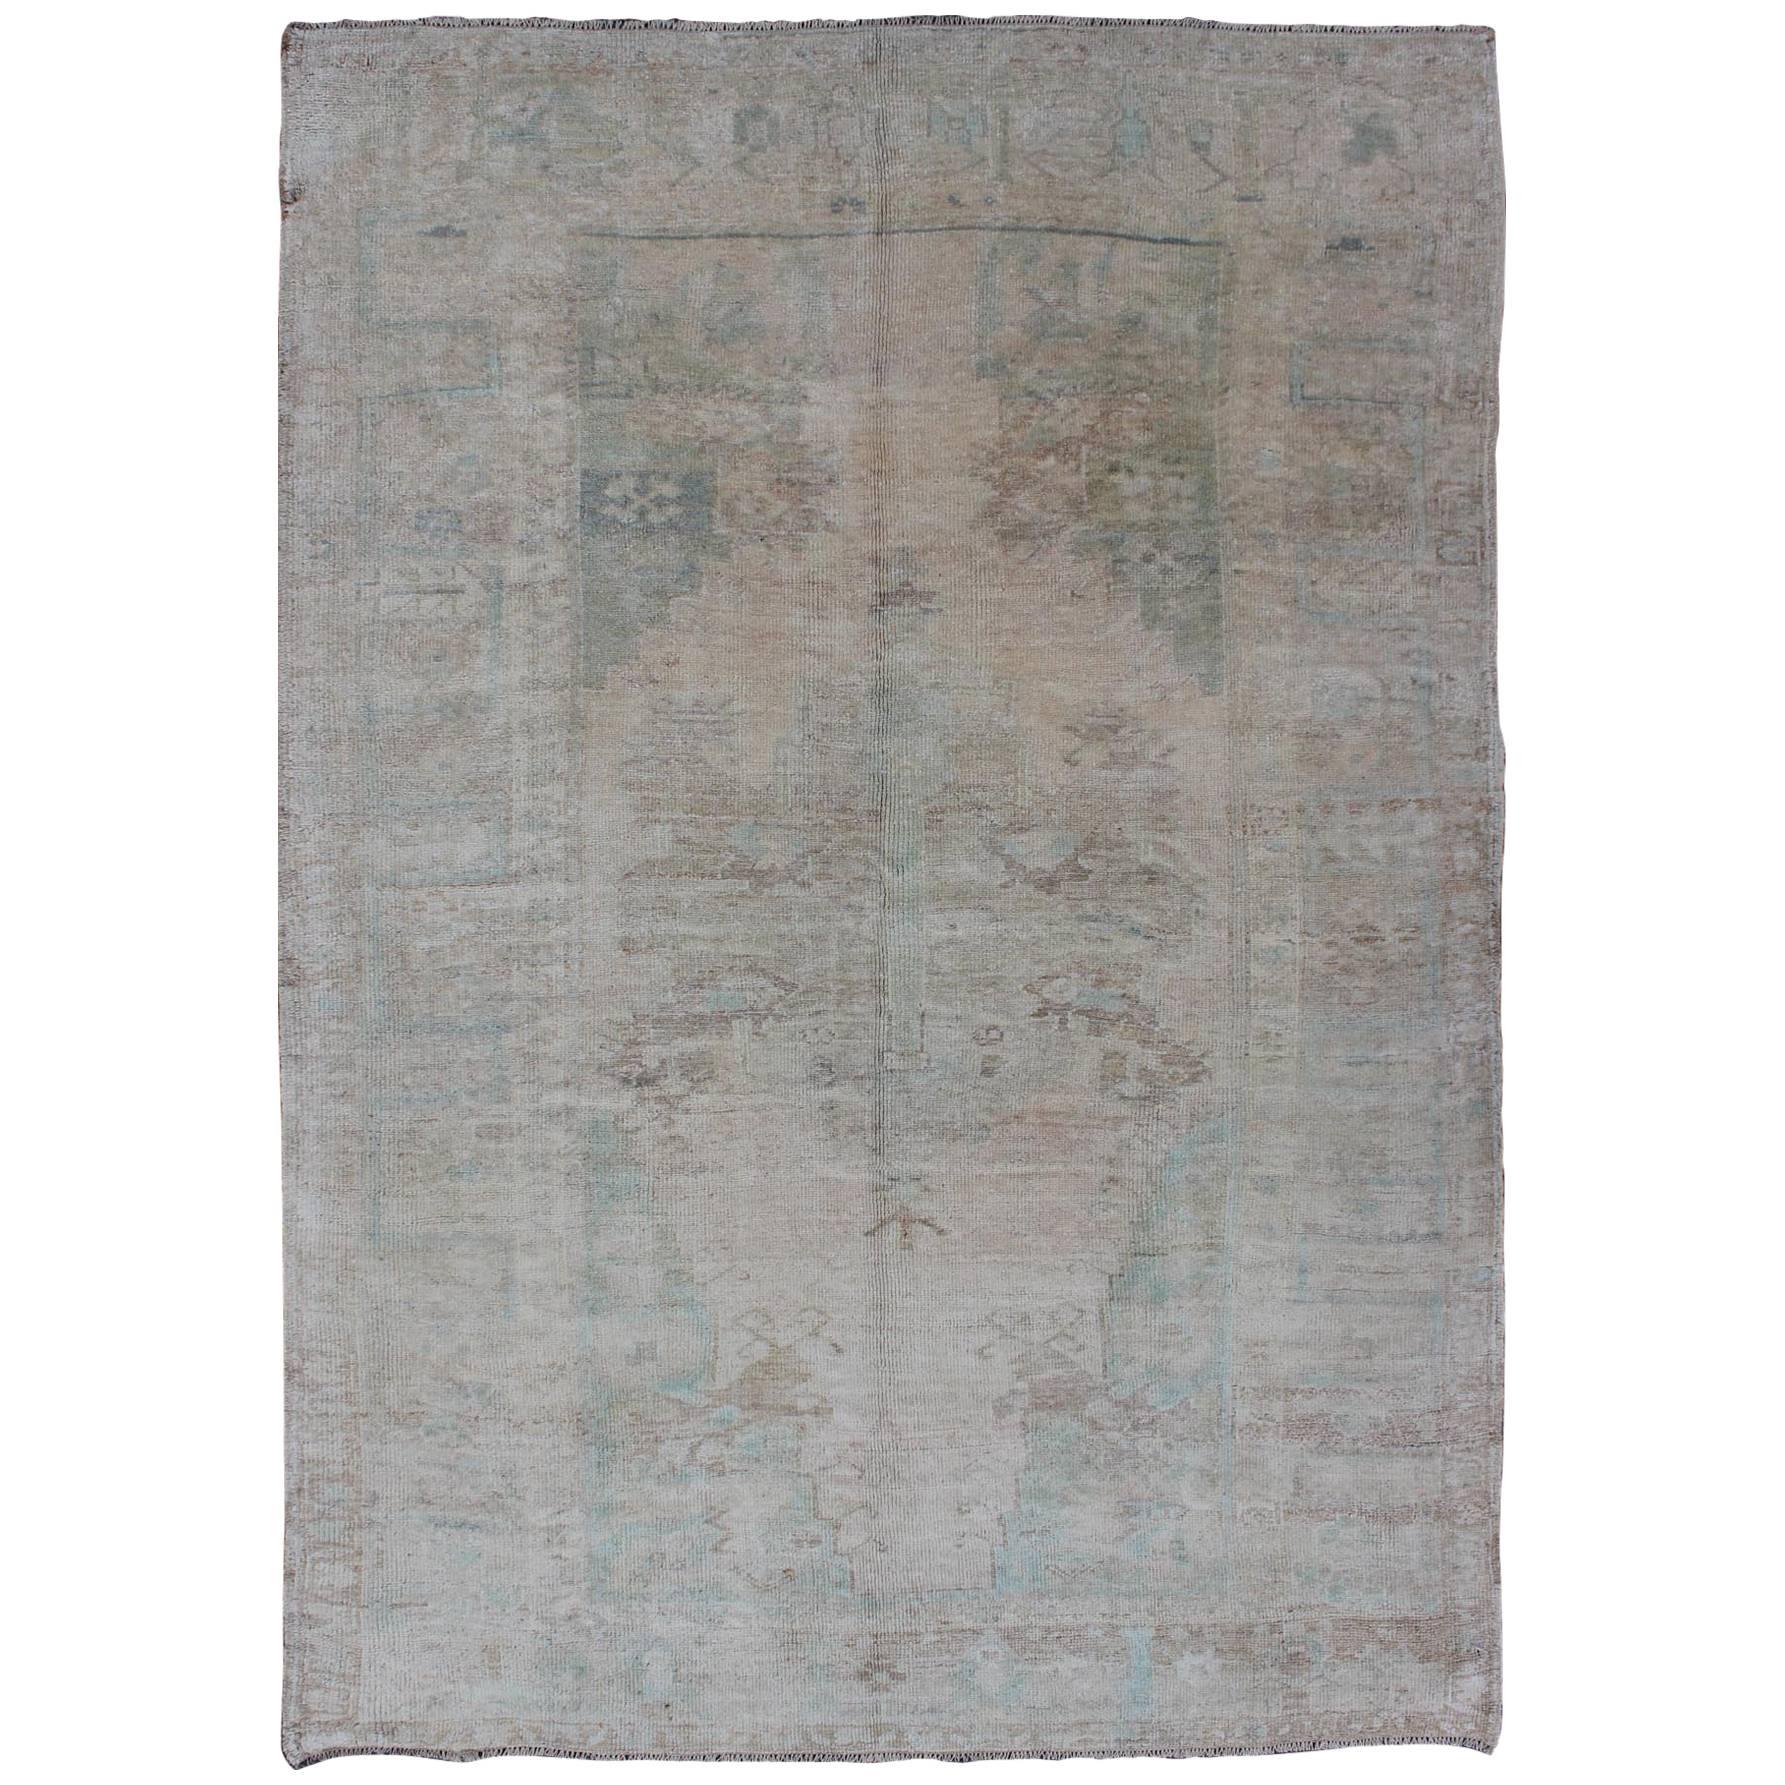 Pale Color Vintage Turkish Oushak Rug With Layered Medallion in Teal, Taupe